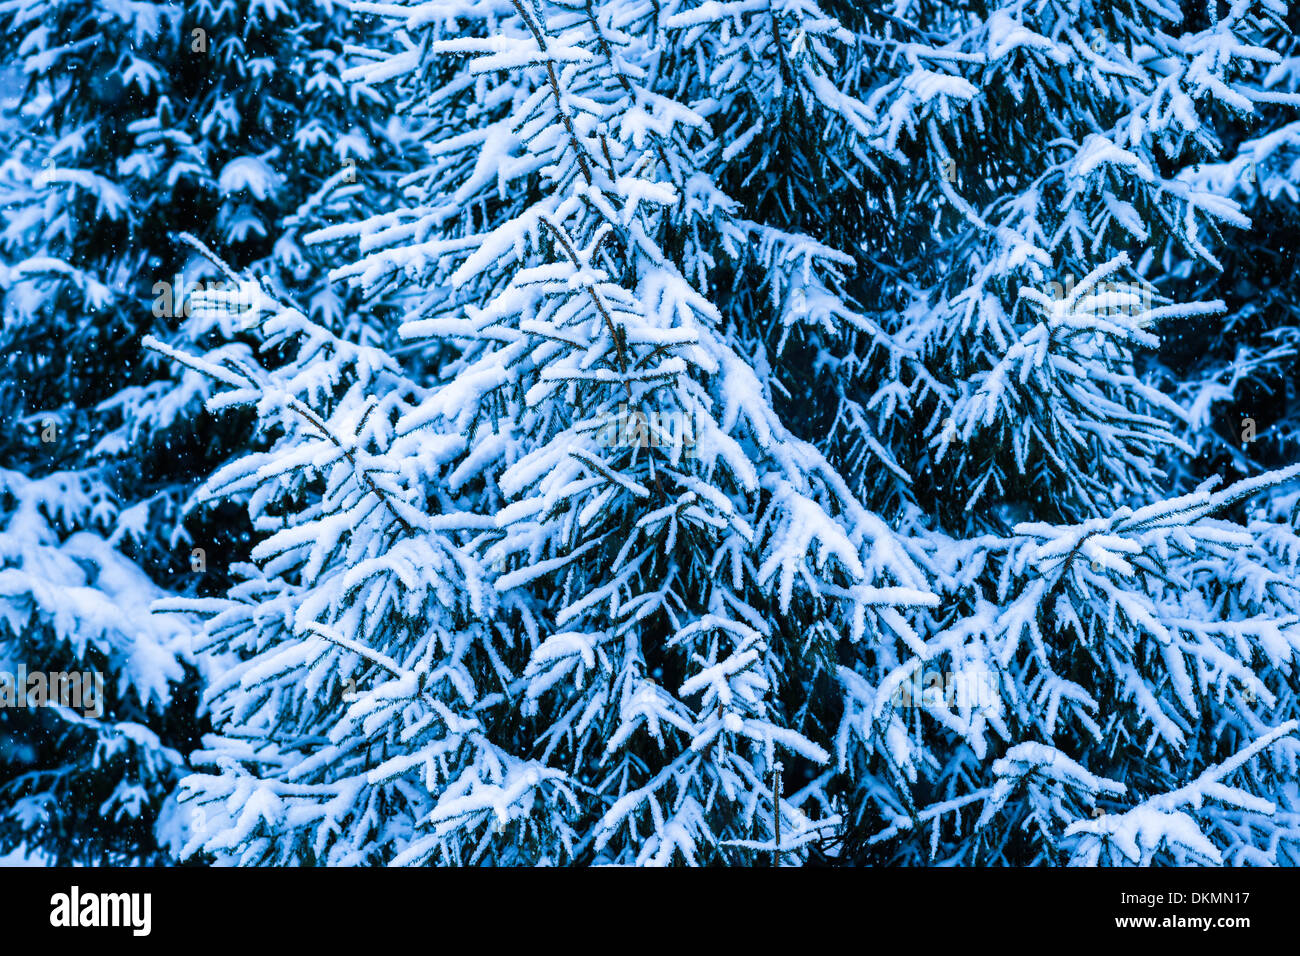 Winter Snow Christmas Tree 2. Fresh snow covered spruce trees in the forest in snowstorm. Dark green, blue and white colors. Stock Photo